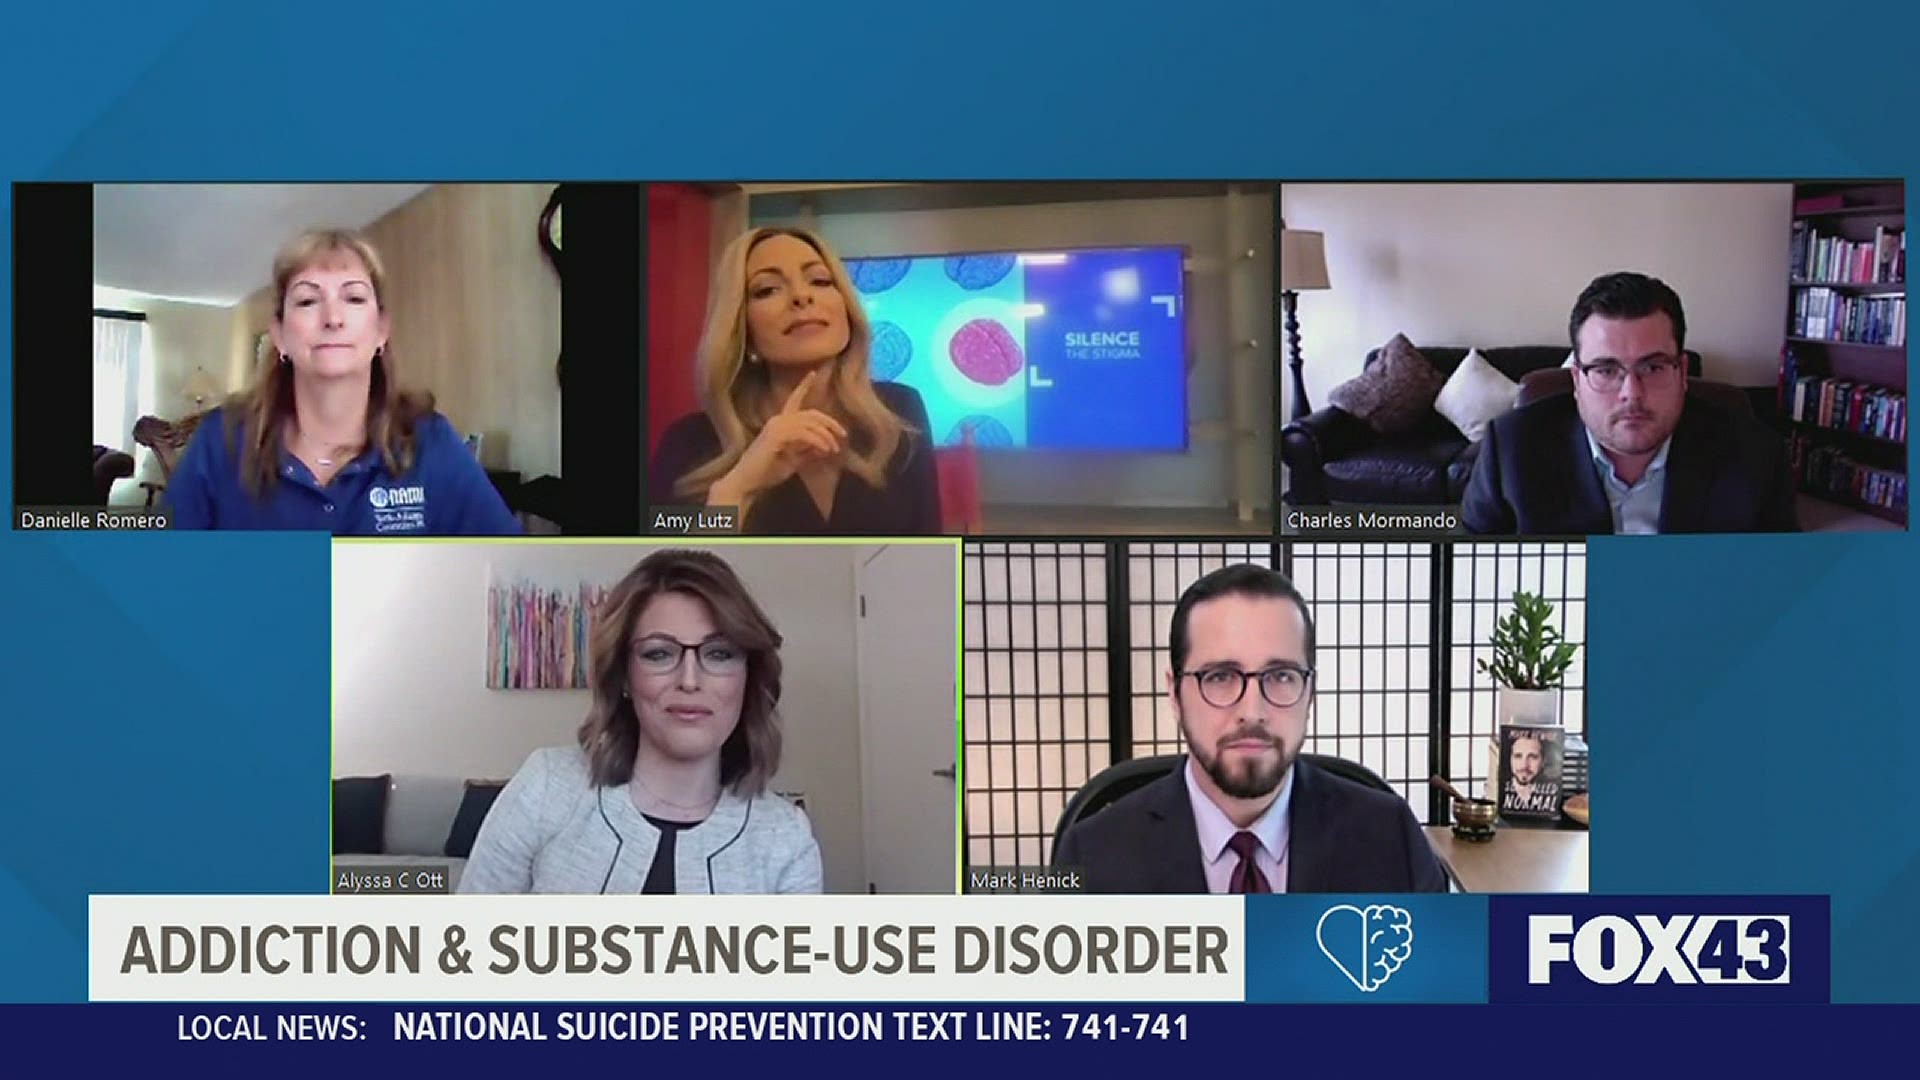 We talked with four experts openly on a variety of topics, including shortages in mental health care, addiction, grief.